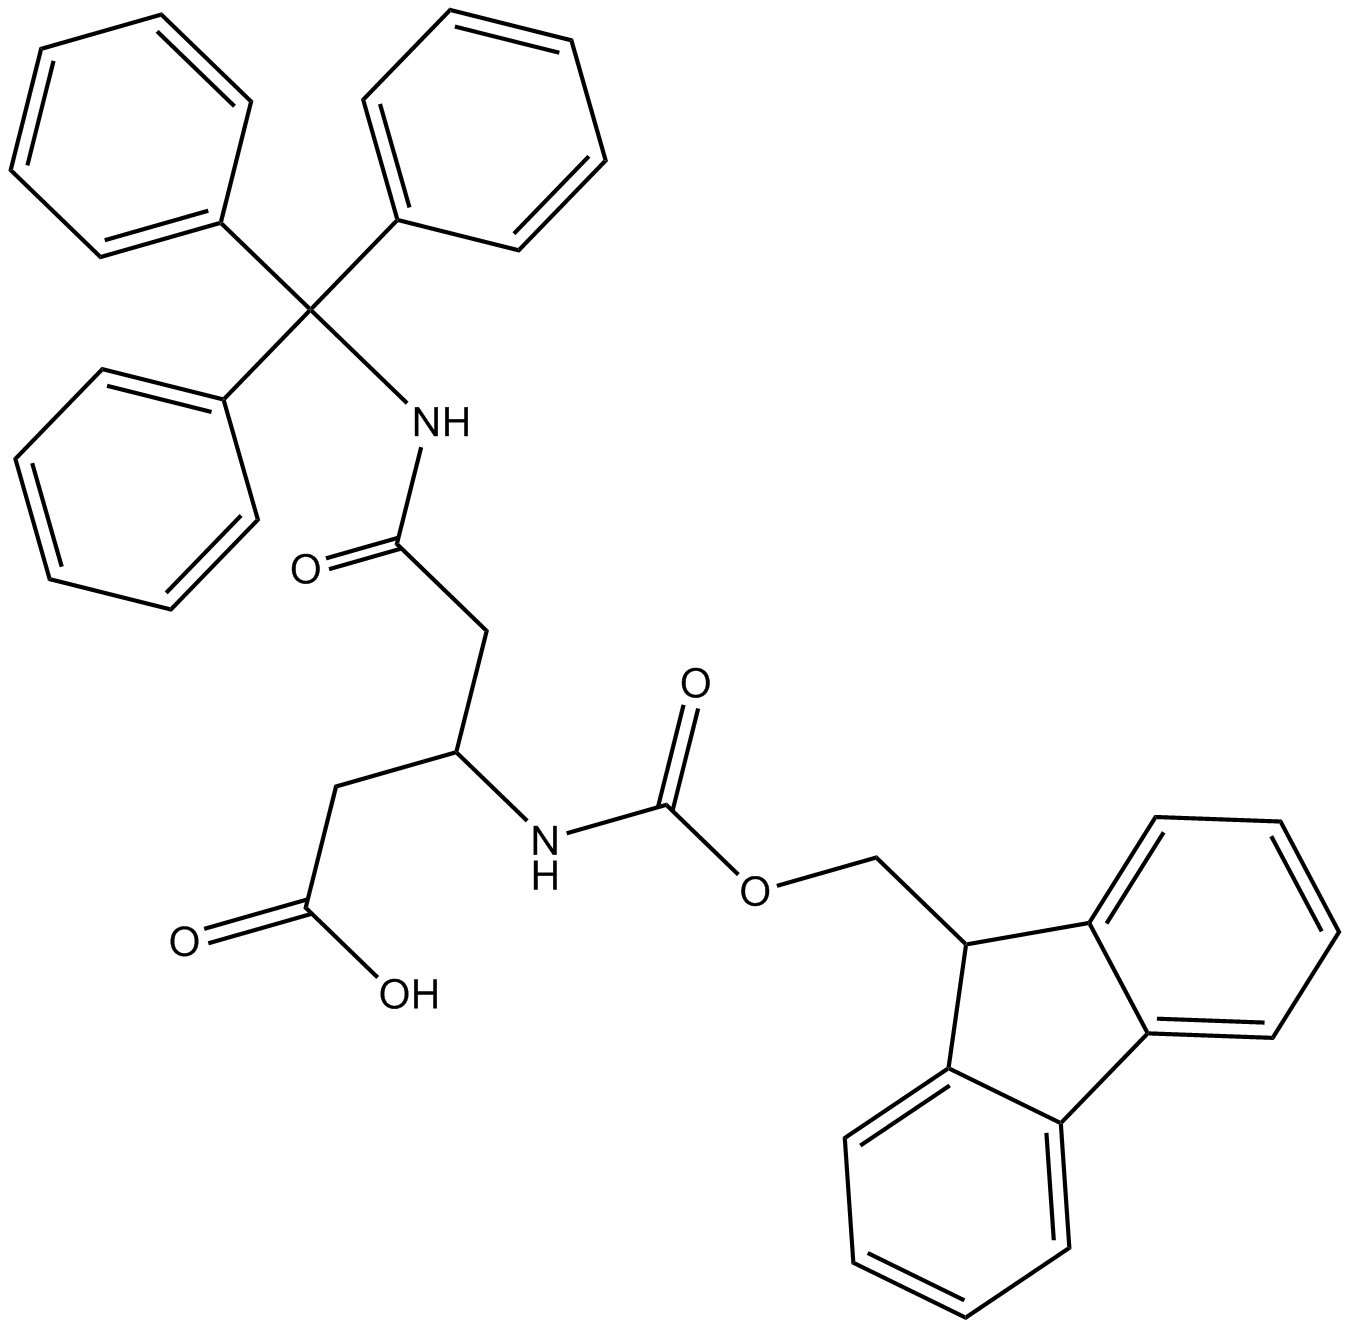 Fmoc-?-HoAsn(Trt)-OH  Chemical Structure